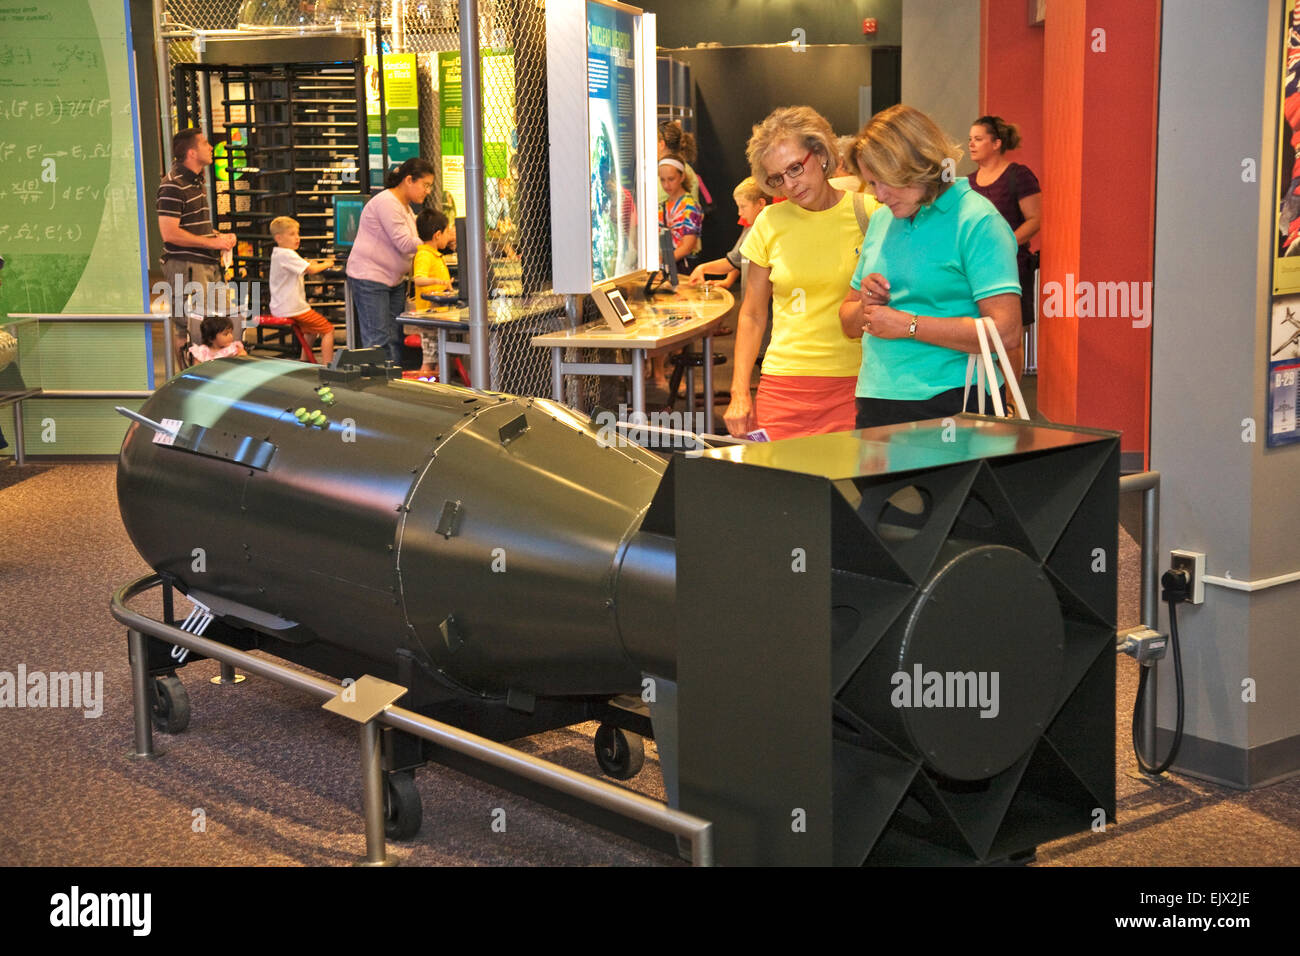 W80-1 Nuclear Warhead, Bradbury Science Museum This is the …